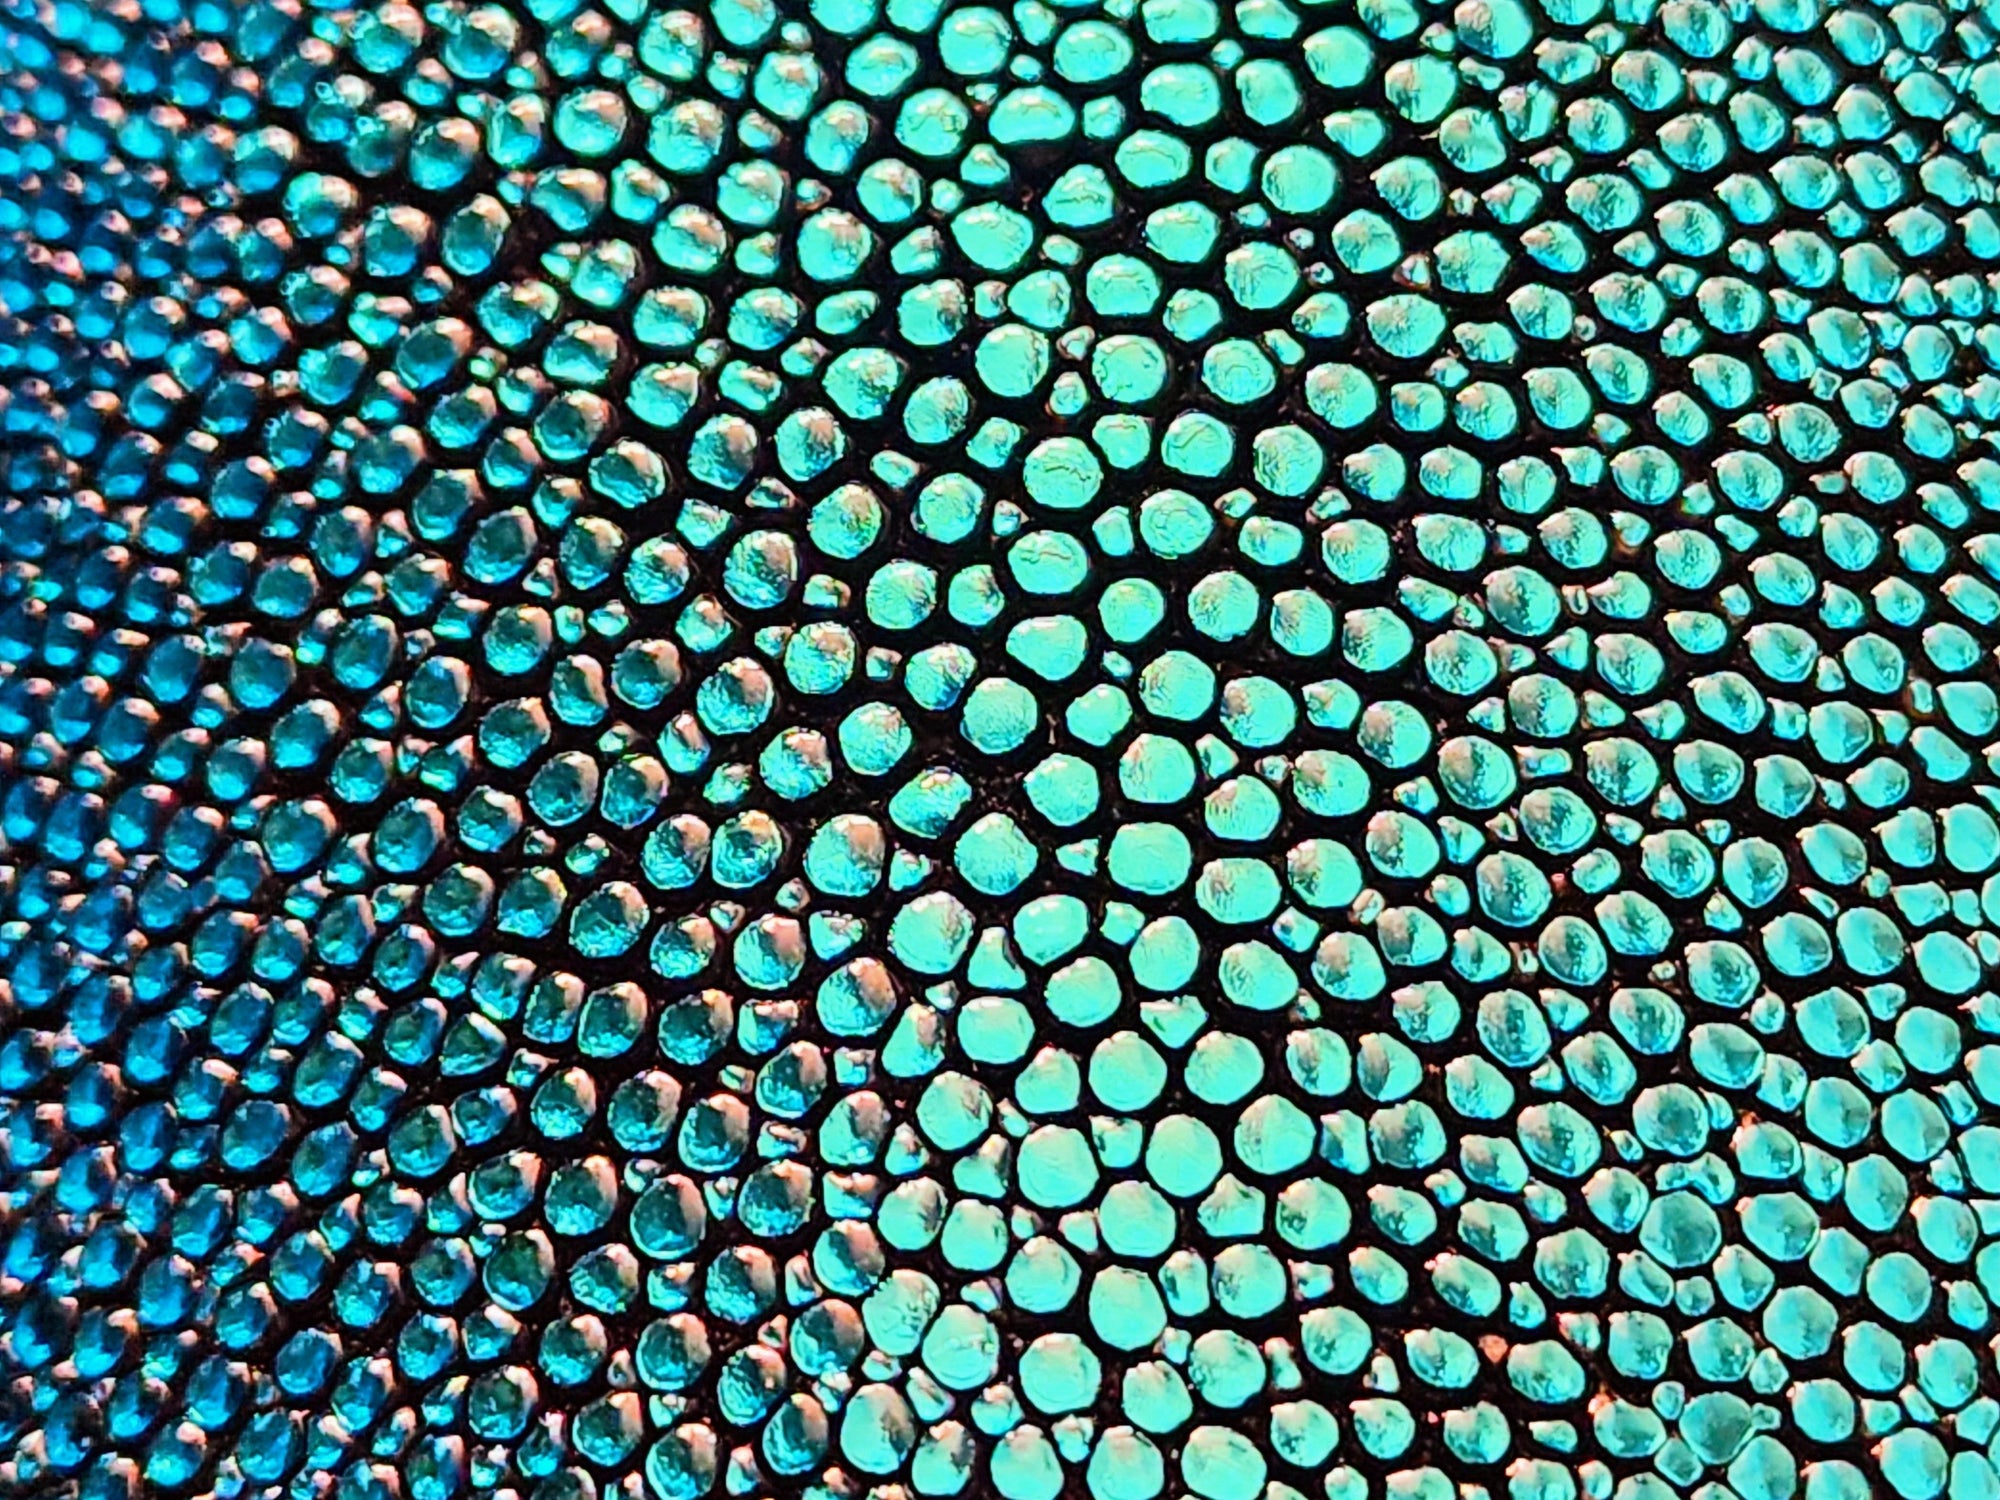  Close-up view of opulent metallic stingray hide in a rich blue green color.